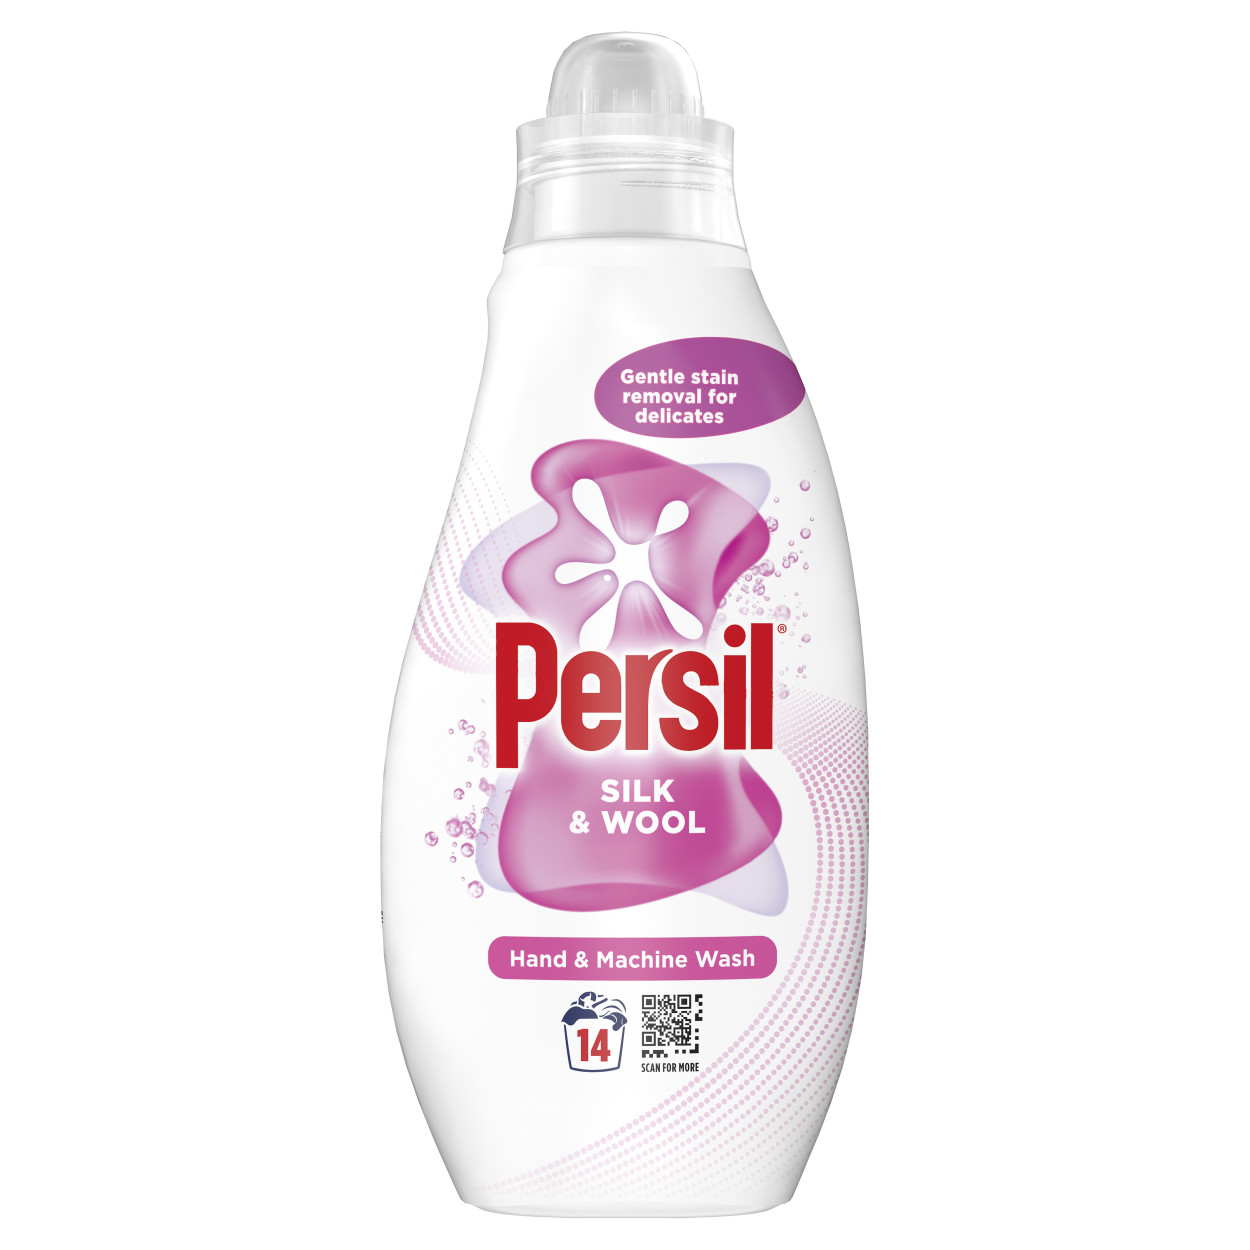 Persil Silk and Wool